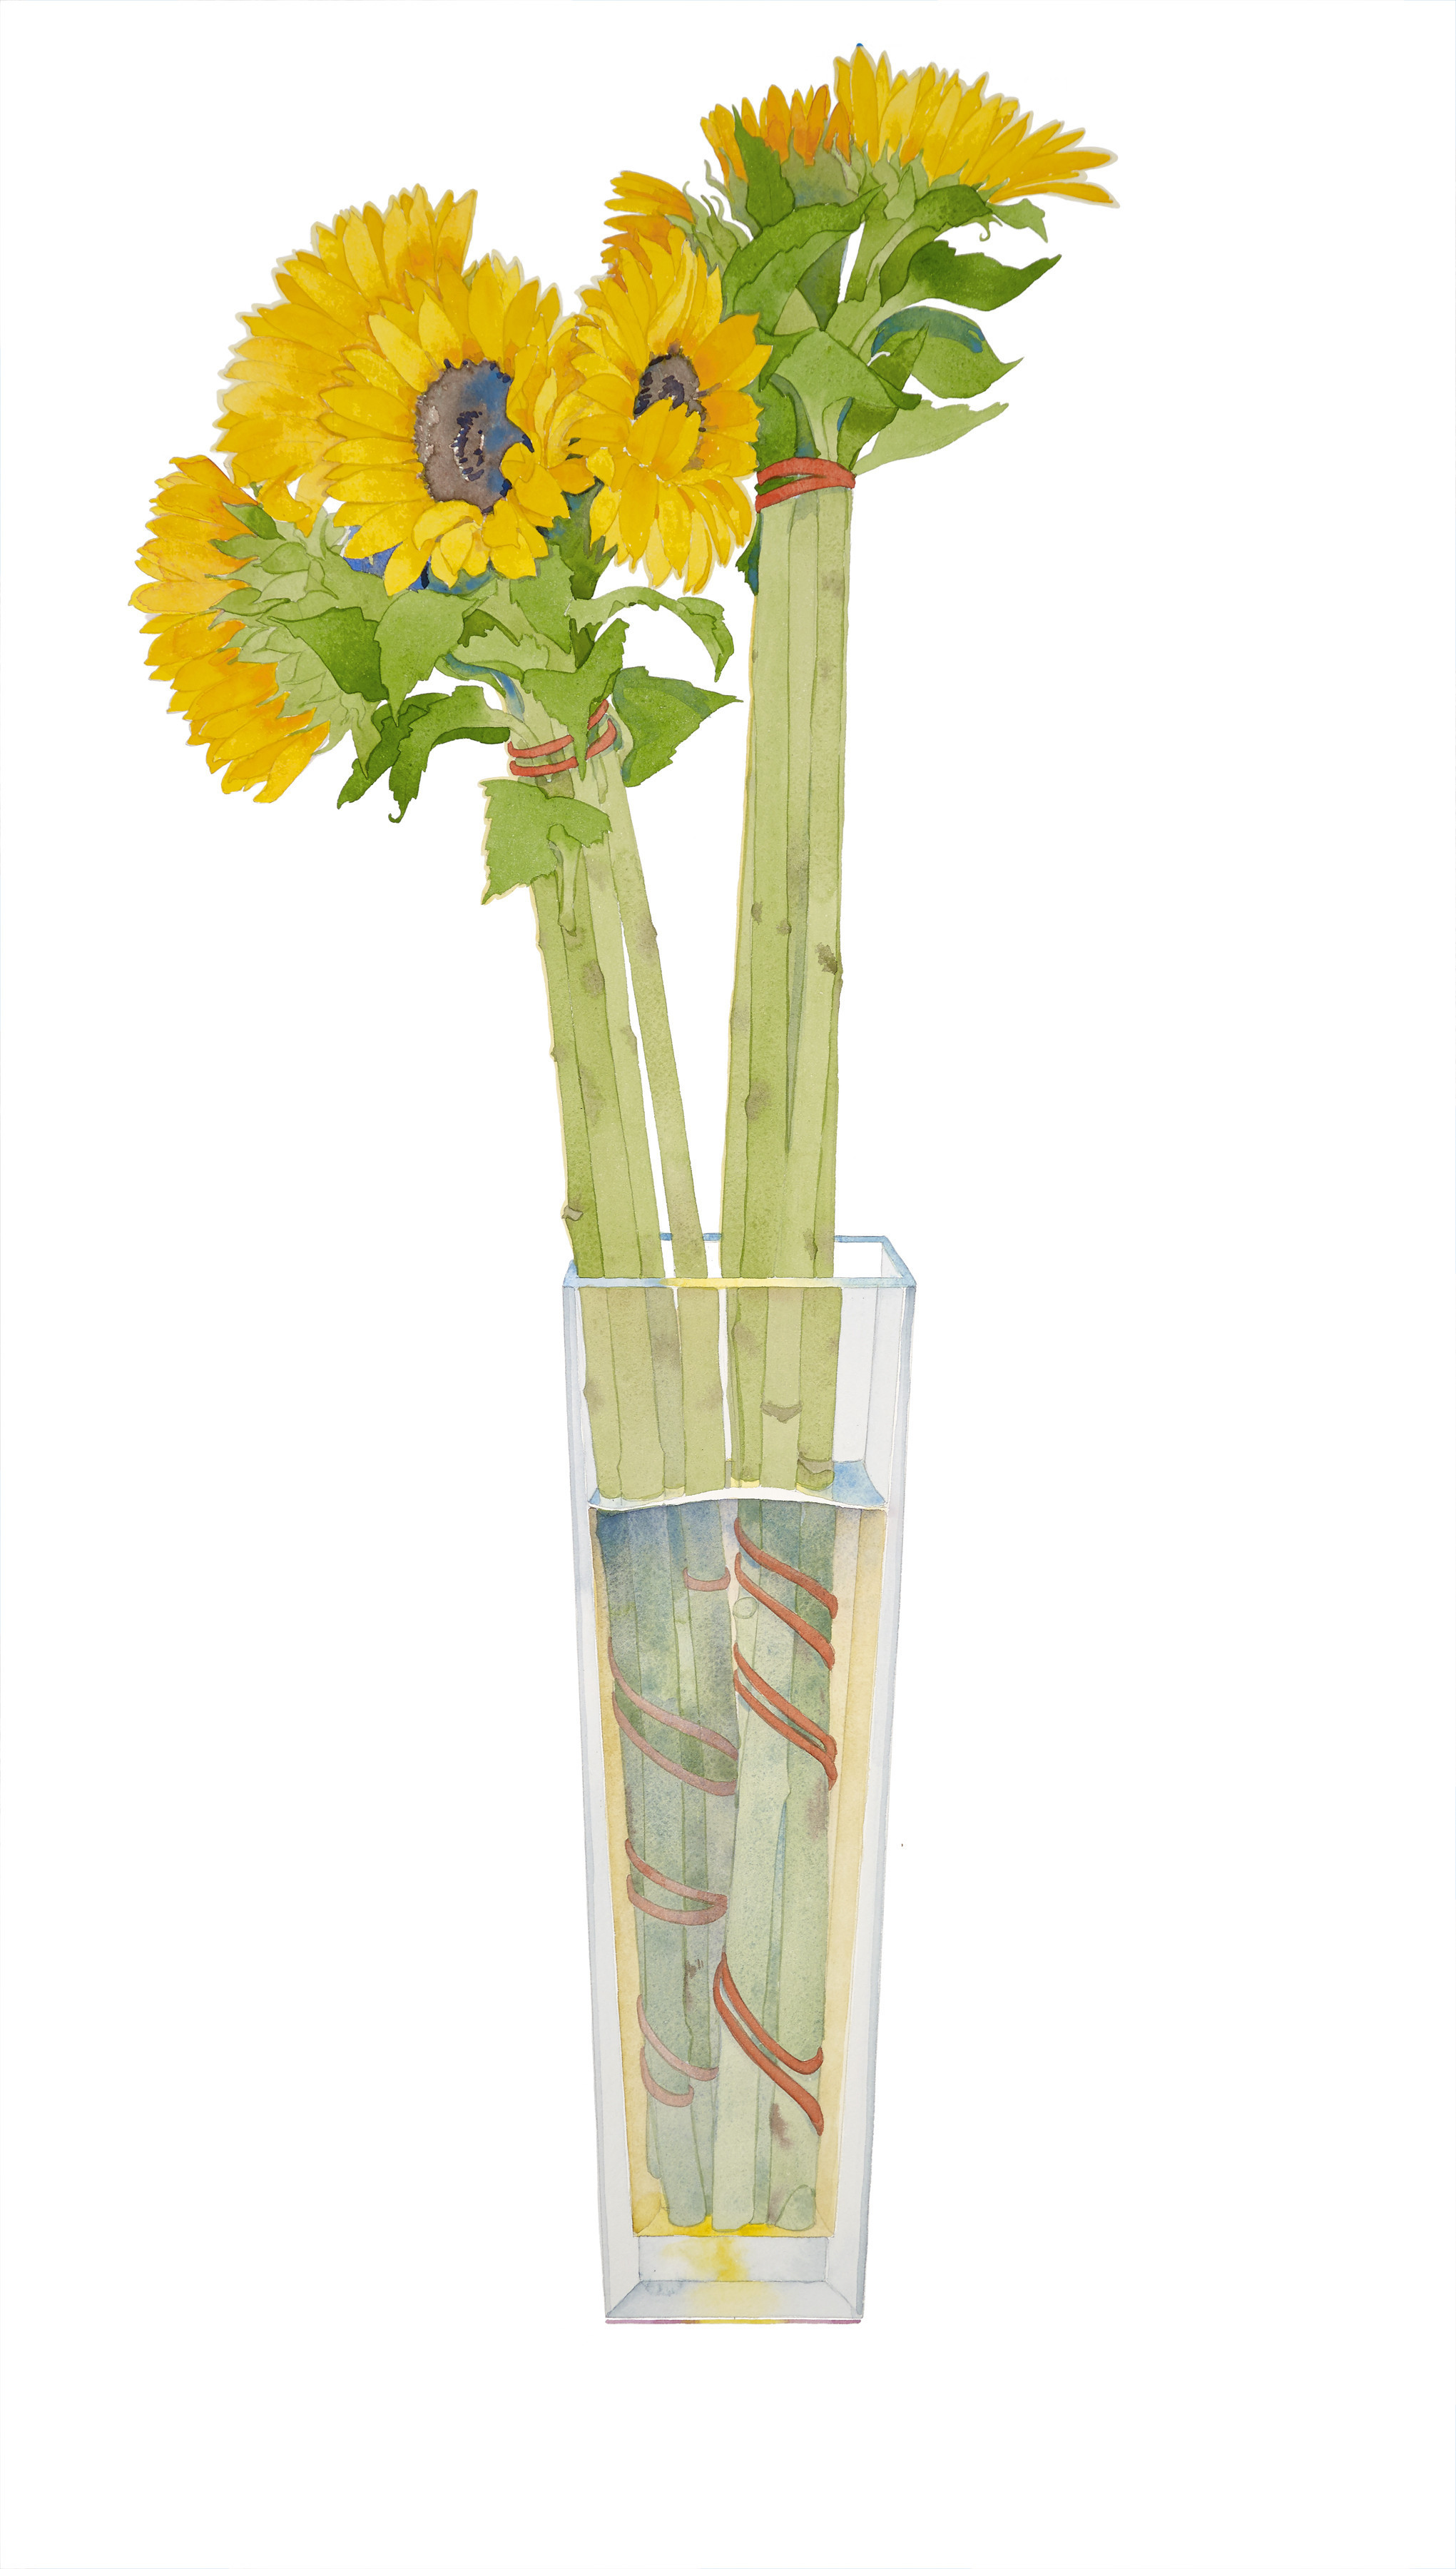 Sunflowers in a tall vase